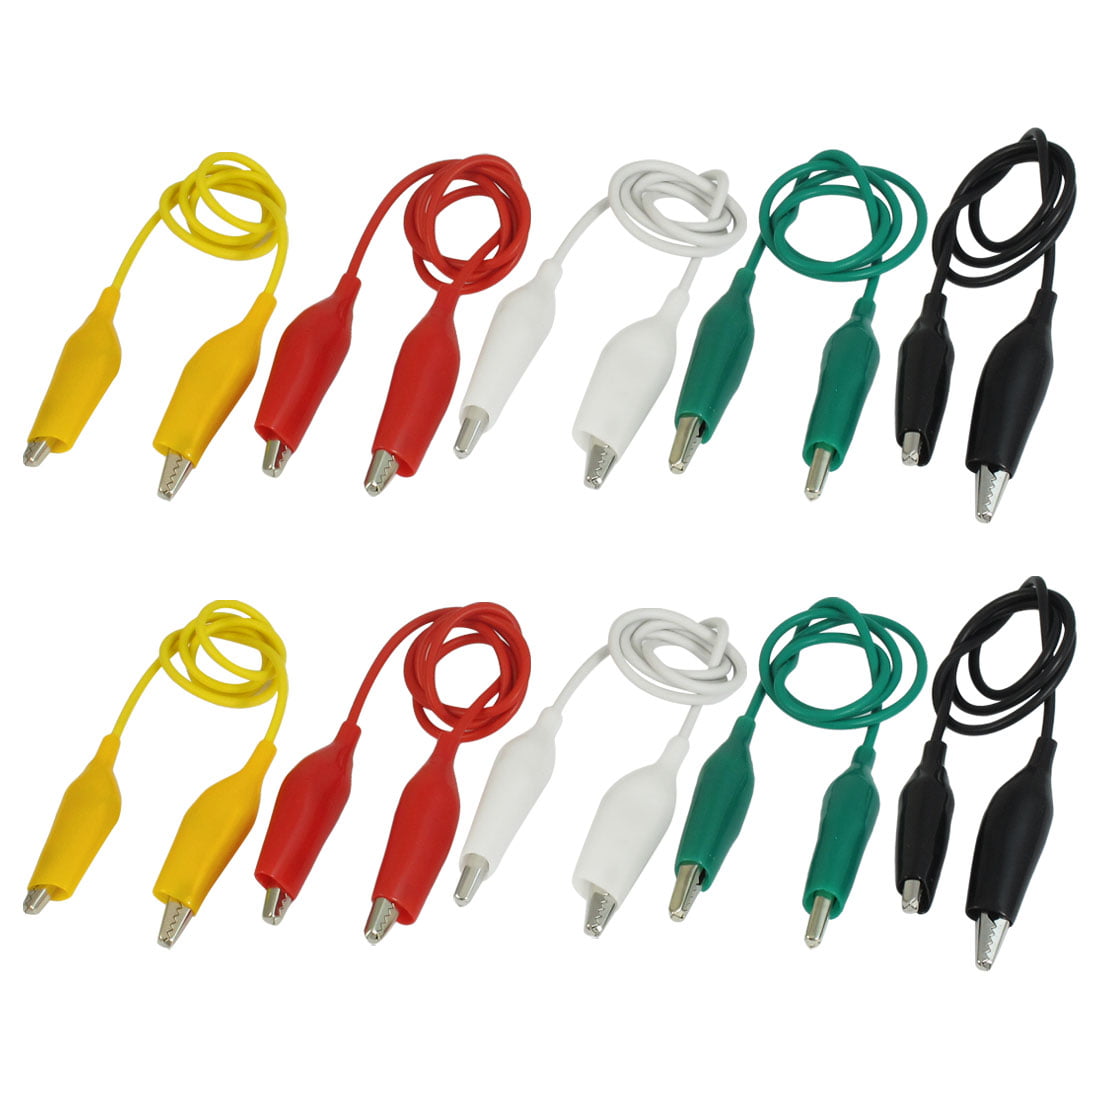 10x Assorted Double-end Test Leads Alligator Crocodile Clip Clamp Jumper Wire 3 